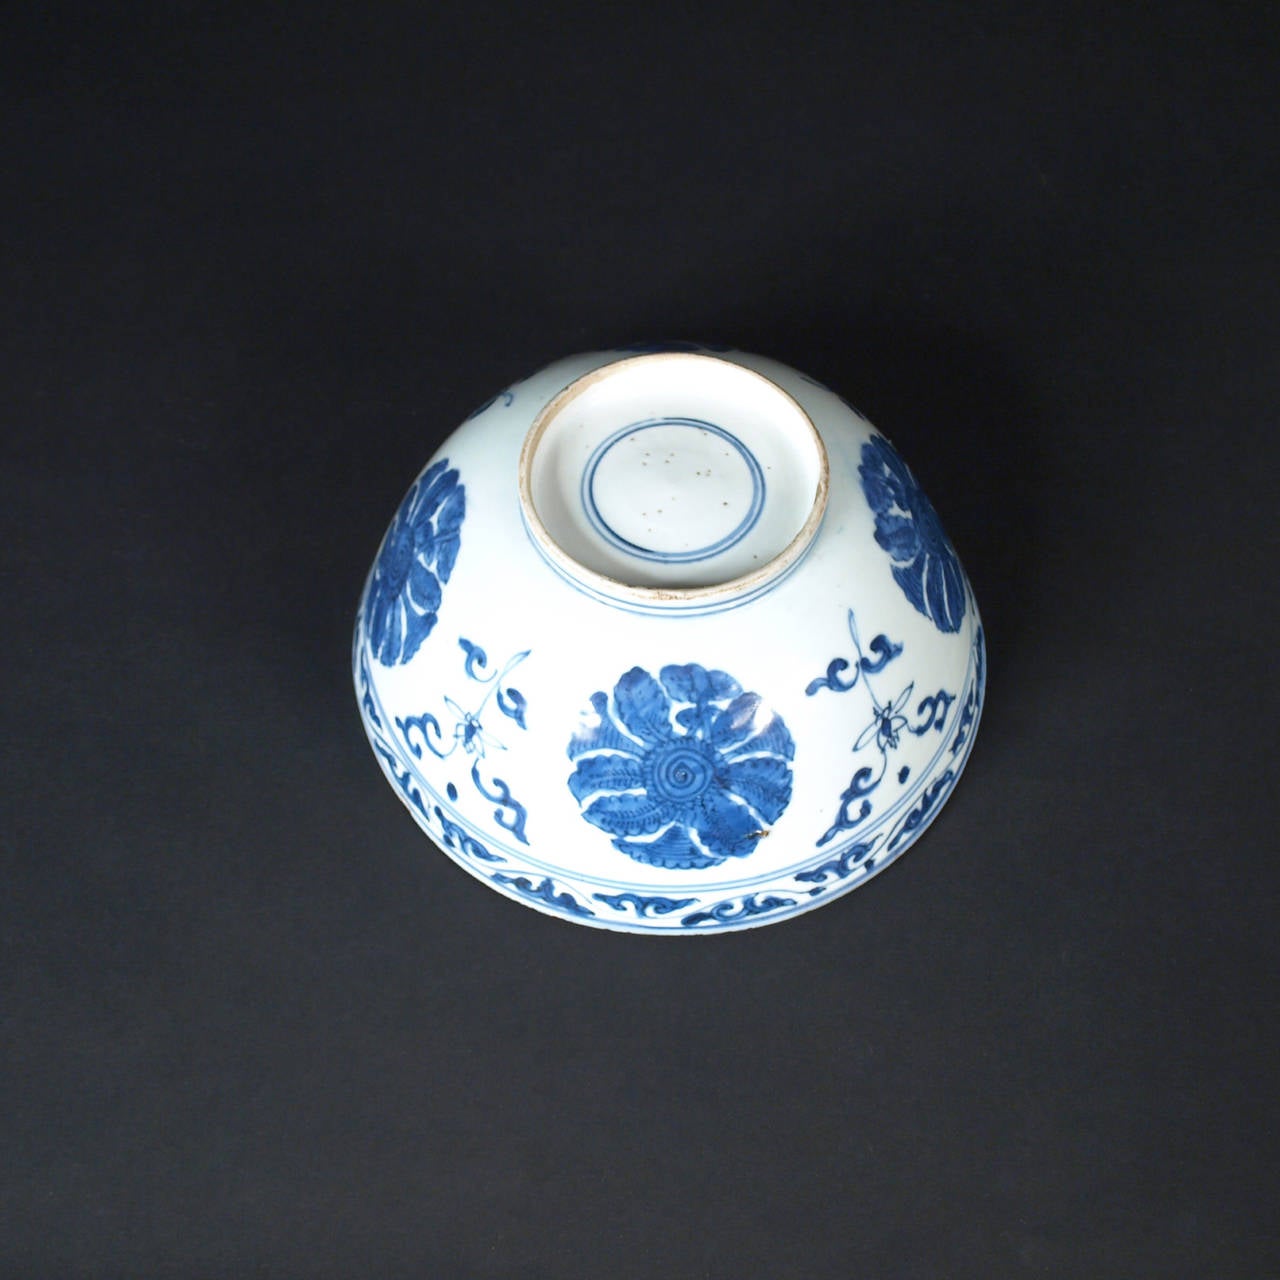 A very nice undercover blue and white Chinese porcelain bowl, outside decorated with flowers and scrolls, inside with a landscape and a lotus flower.
China, end of the 16th century, Wanli, Ming period.

For a similar piece: Rijksmuseum Amsterdam,